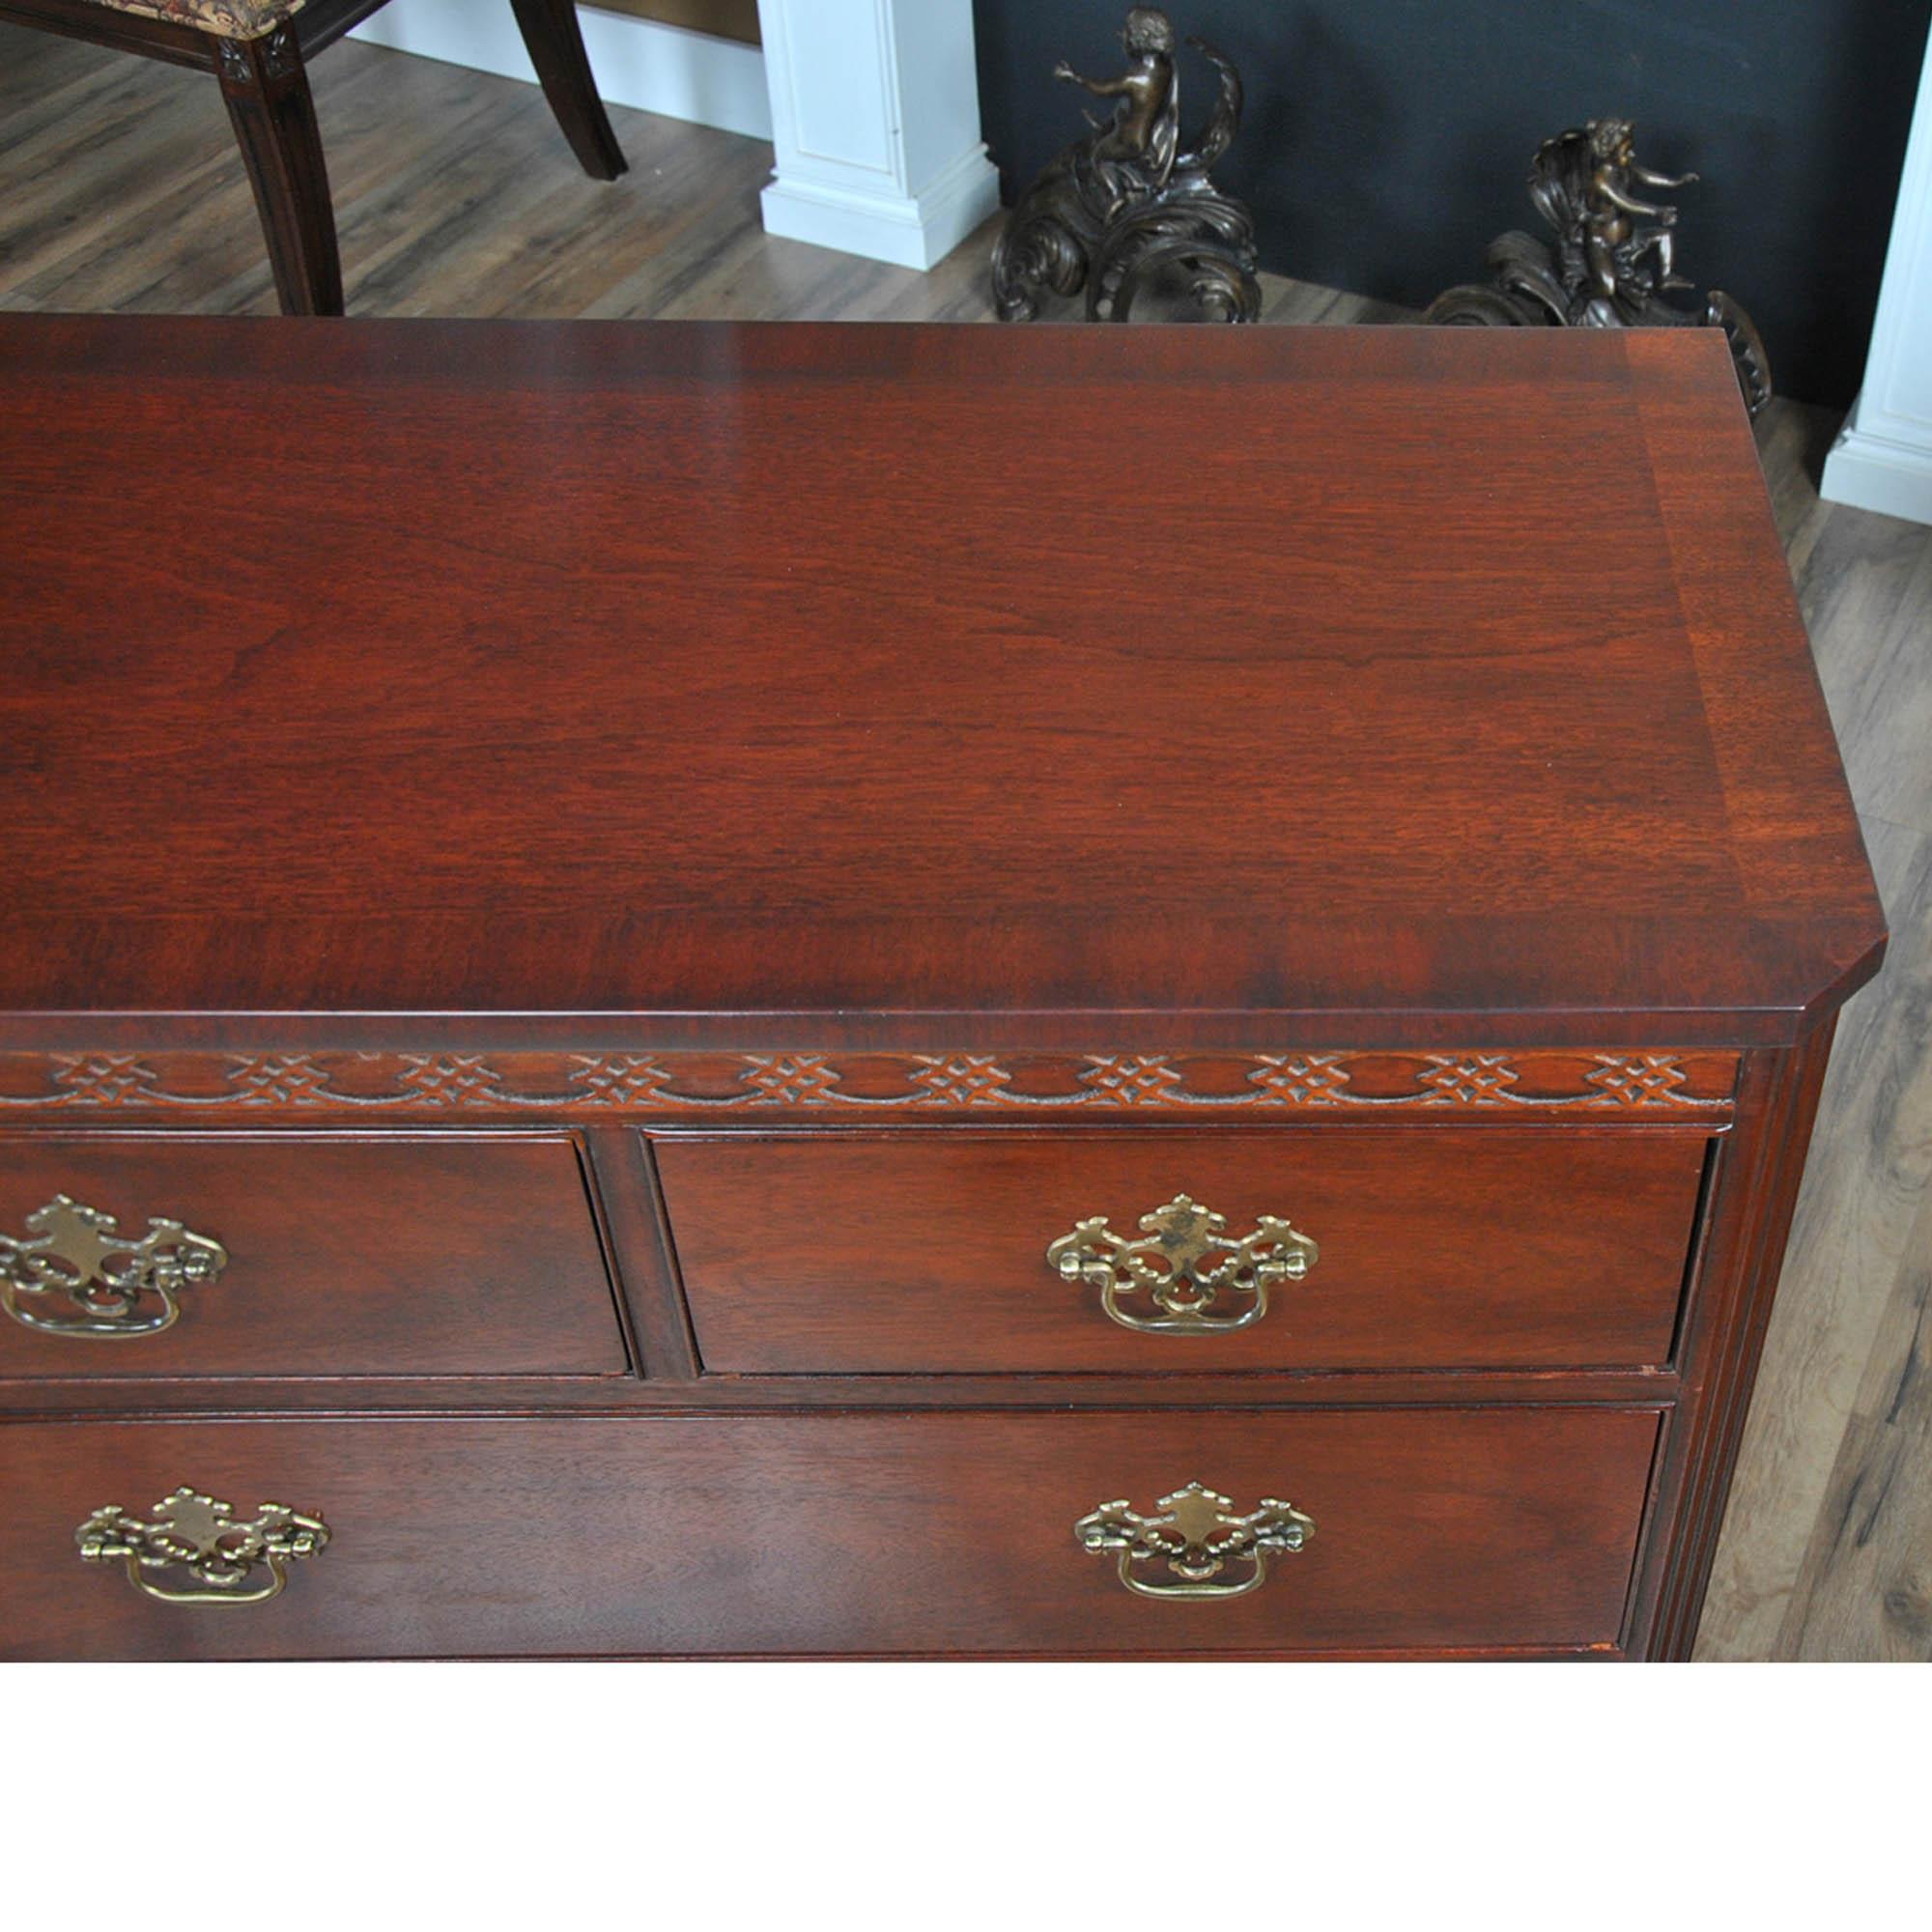 A Mahogany Triple Dresser by Baker Furniture. A classic furniture shape this chest features three drawers  across the top section and two rows of two drawers below to give this large dresser an elegant and traditional furniture appearance that is